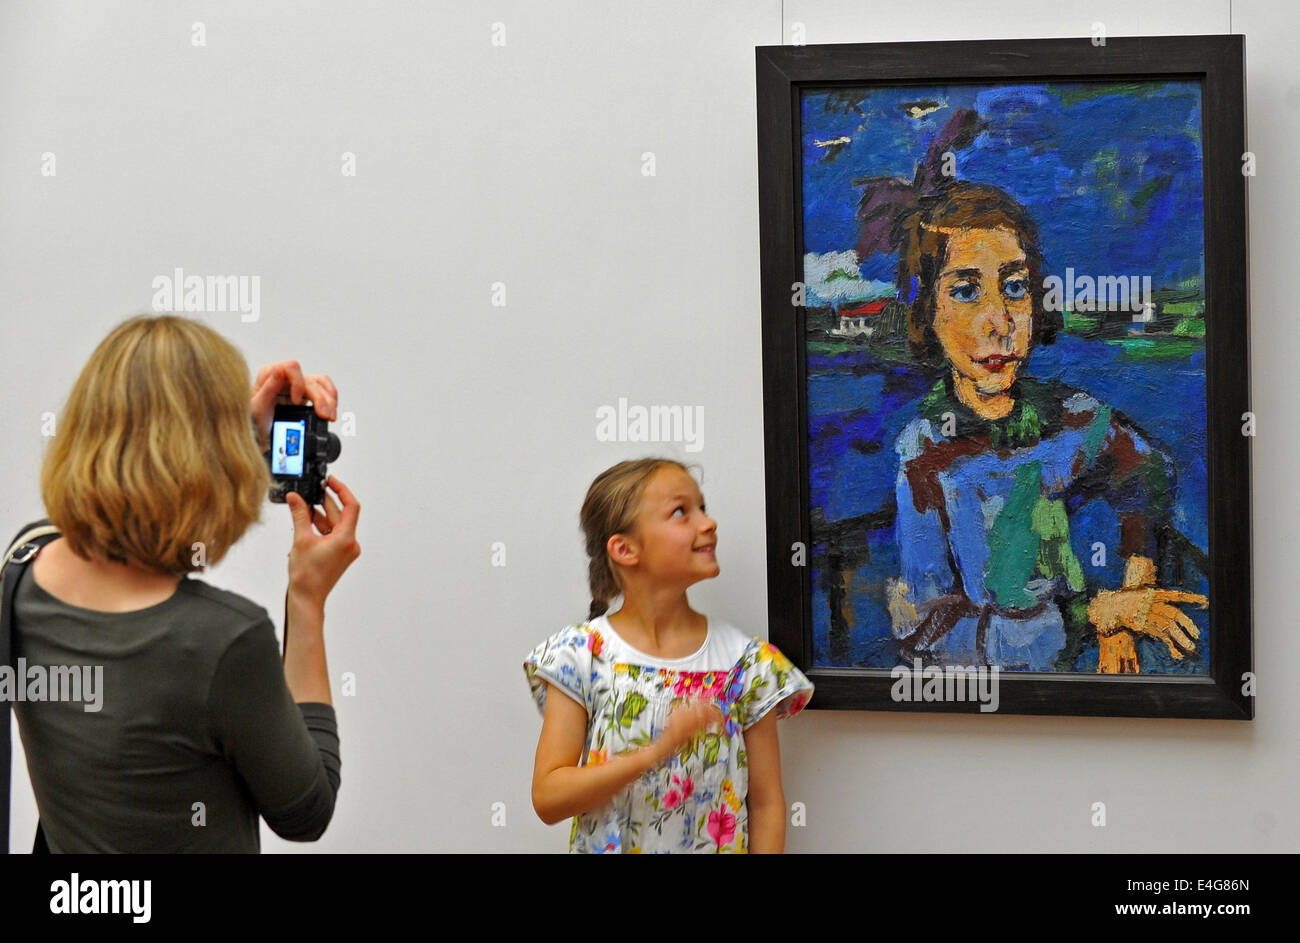 A girl poses next to the painting 'Gitta Wallerstein' from the year 1921 by Oskar Kokoschka (1886-1980) at the Galerie Neue Meister (lit. New Masters Gallery) in Dresden, Germany, 10 July 2014. The Gallery purchased the painting for 2,6 million Euro from a private owner. Photo: MATTHIAS HIEKEL/dpa Stock Photo